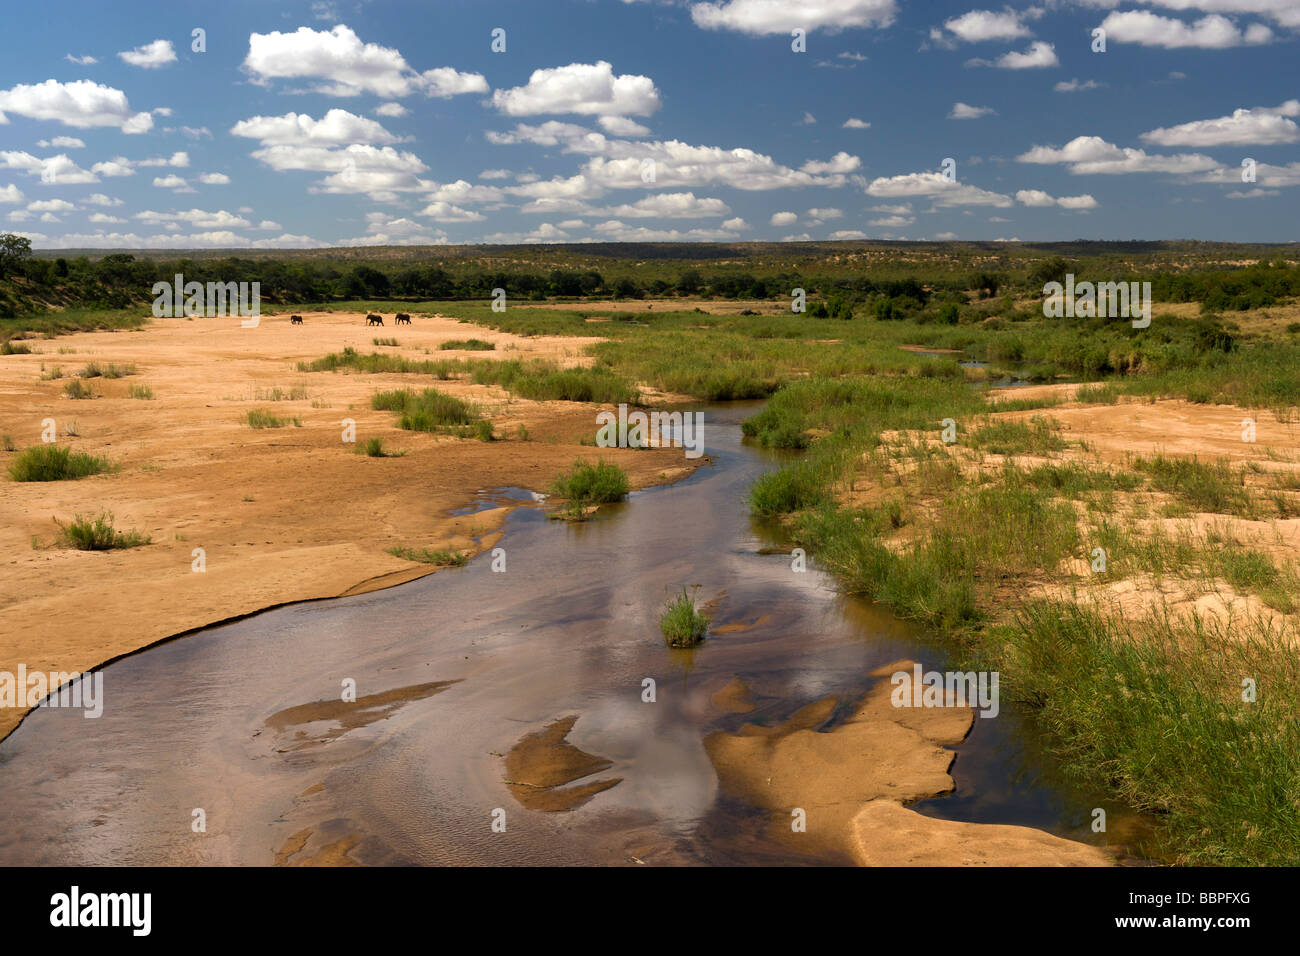 View of the Letaba River and surrounding landscape in the Kruger National Park in South Africa. Stock Photo